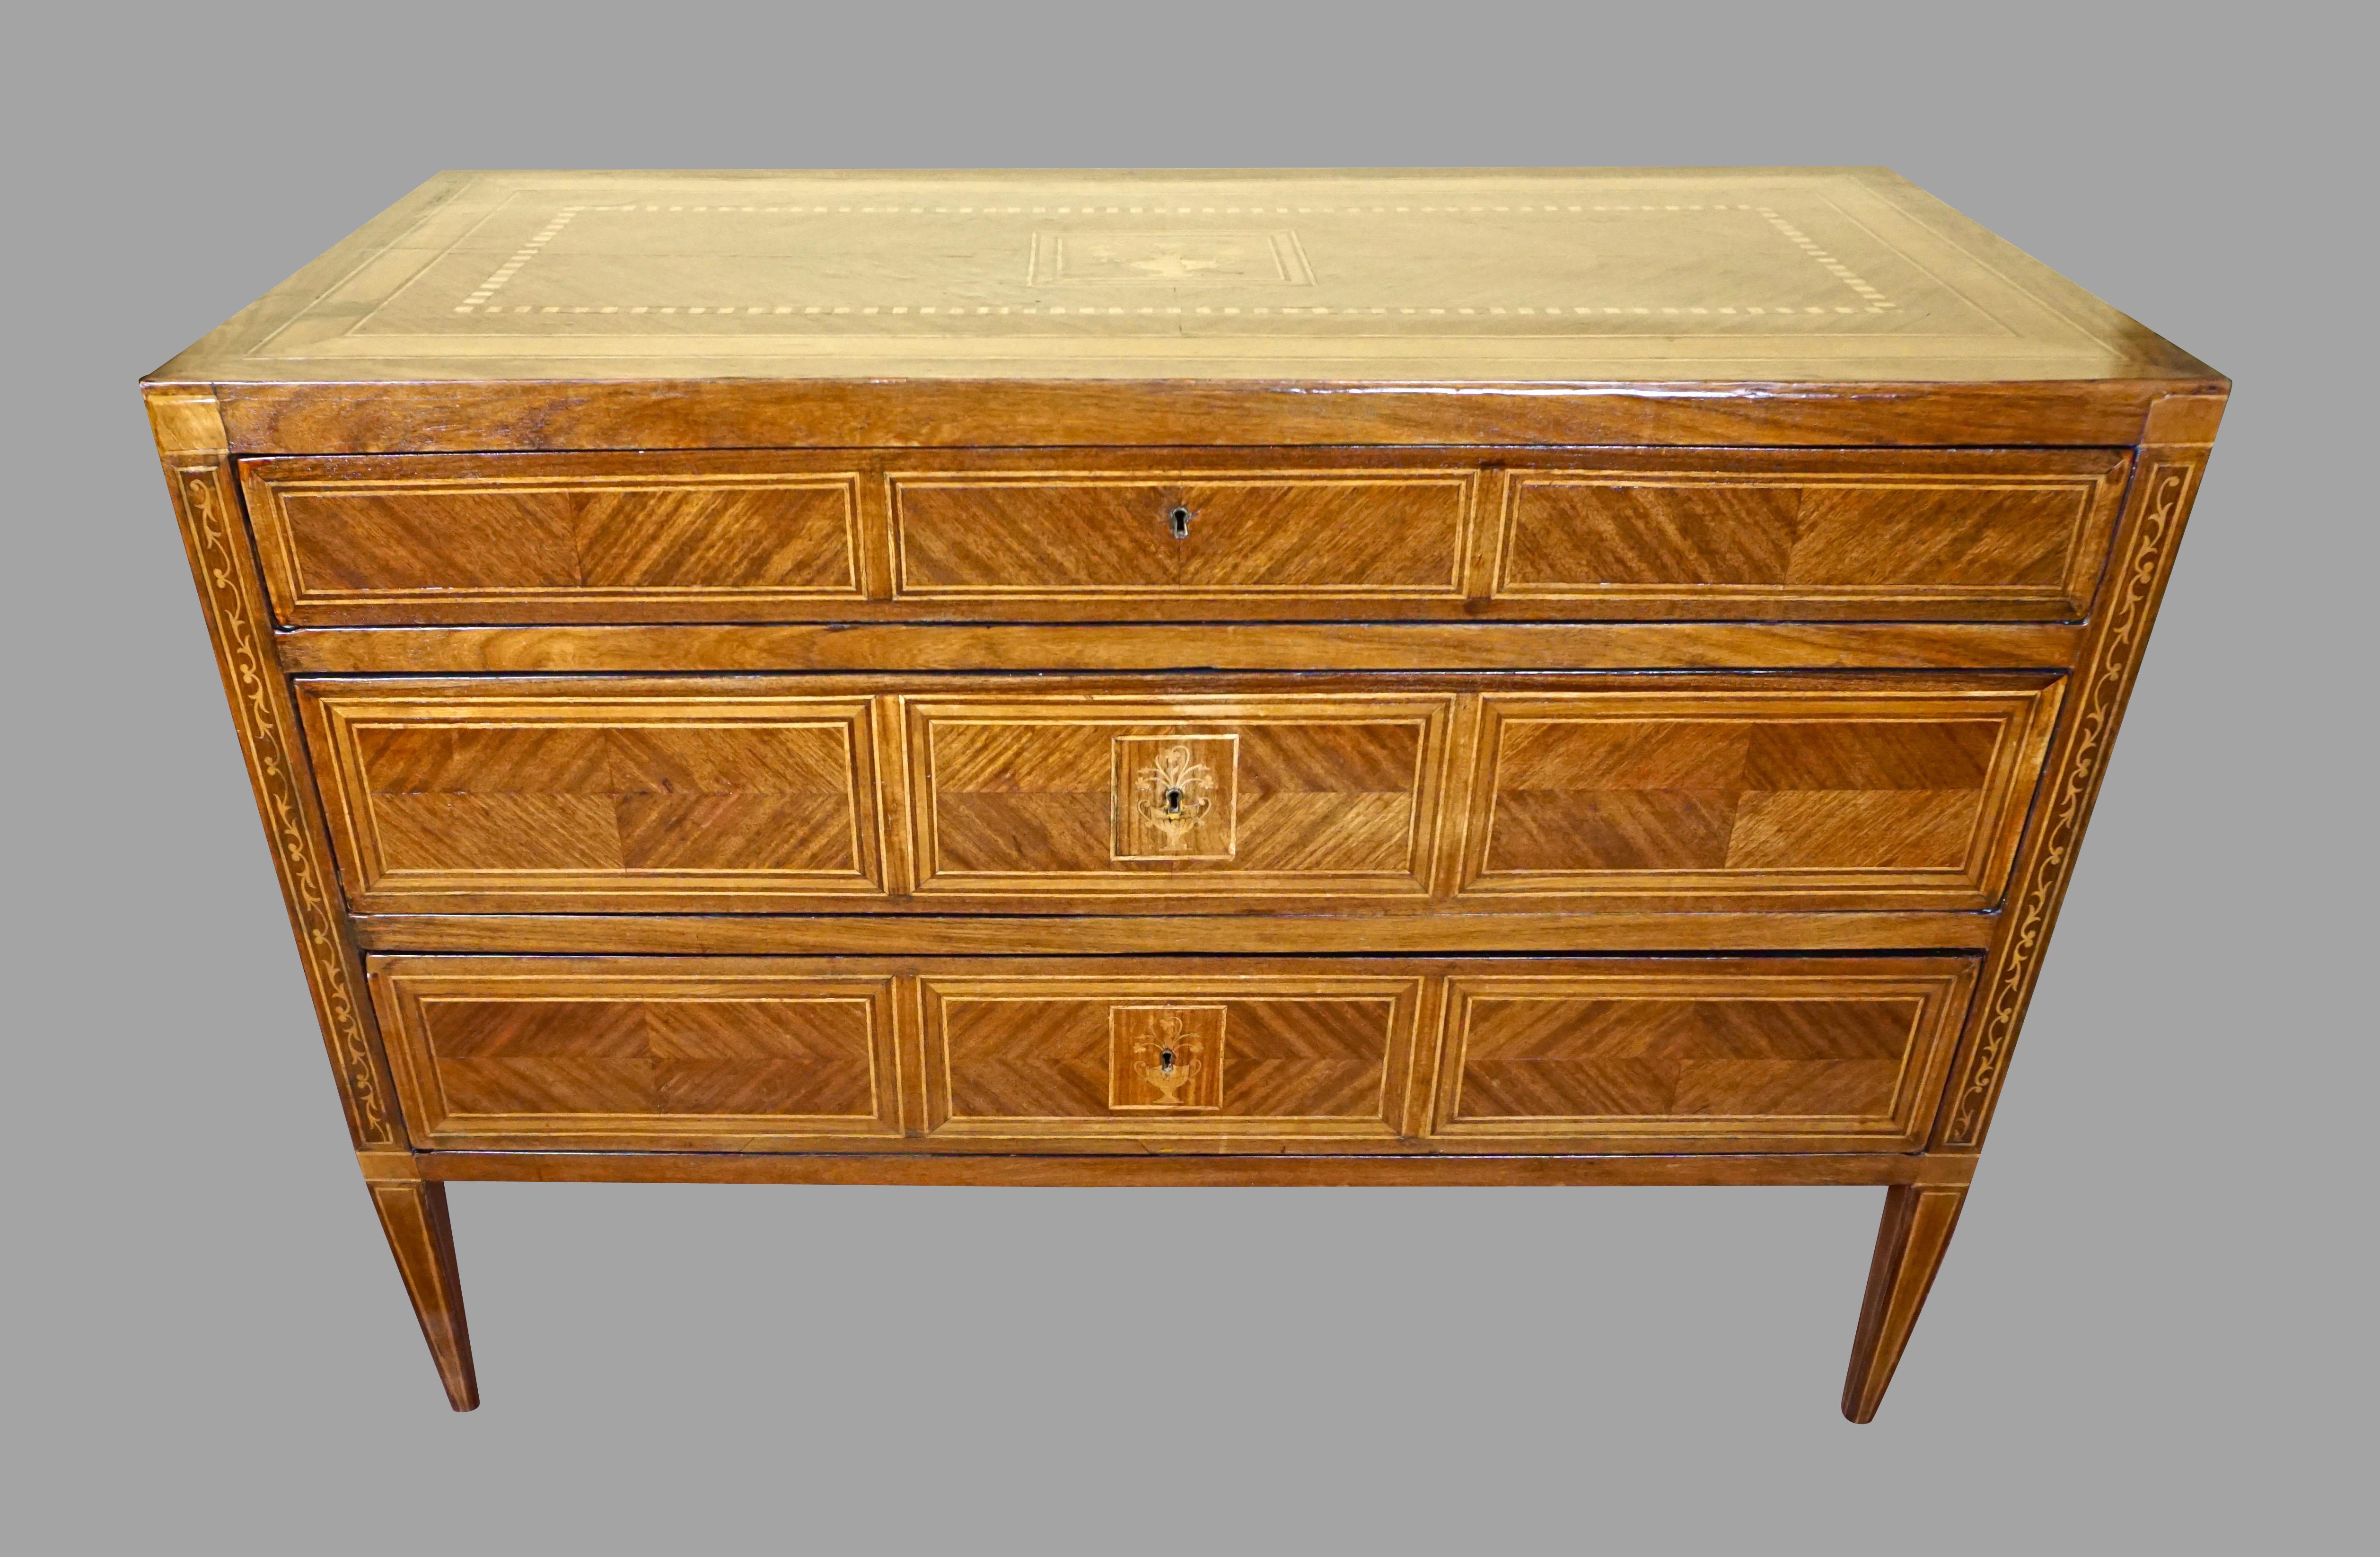 A substantial 18th century Italian Neoclassical period walnut 3-drawer commode, inlaid overall with rosewood, fruitwood and boxwood marquetry, the narrow top drawer over two additional deeper drawers supported on line inlaid taped legs. Bears the